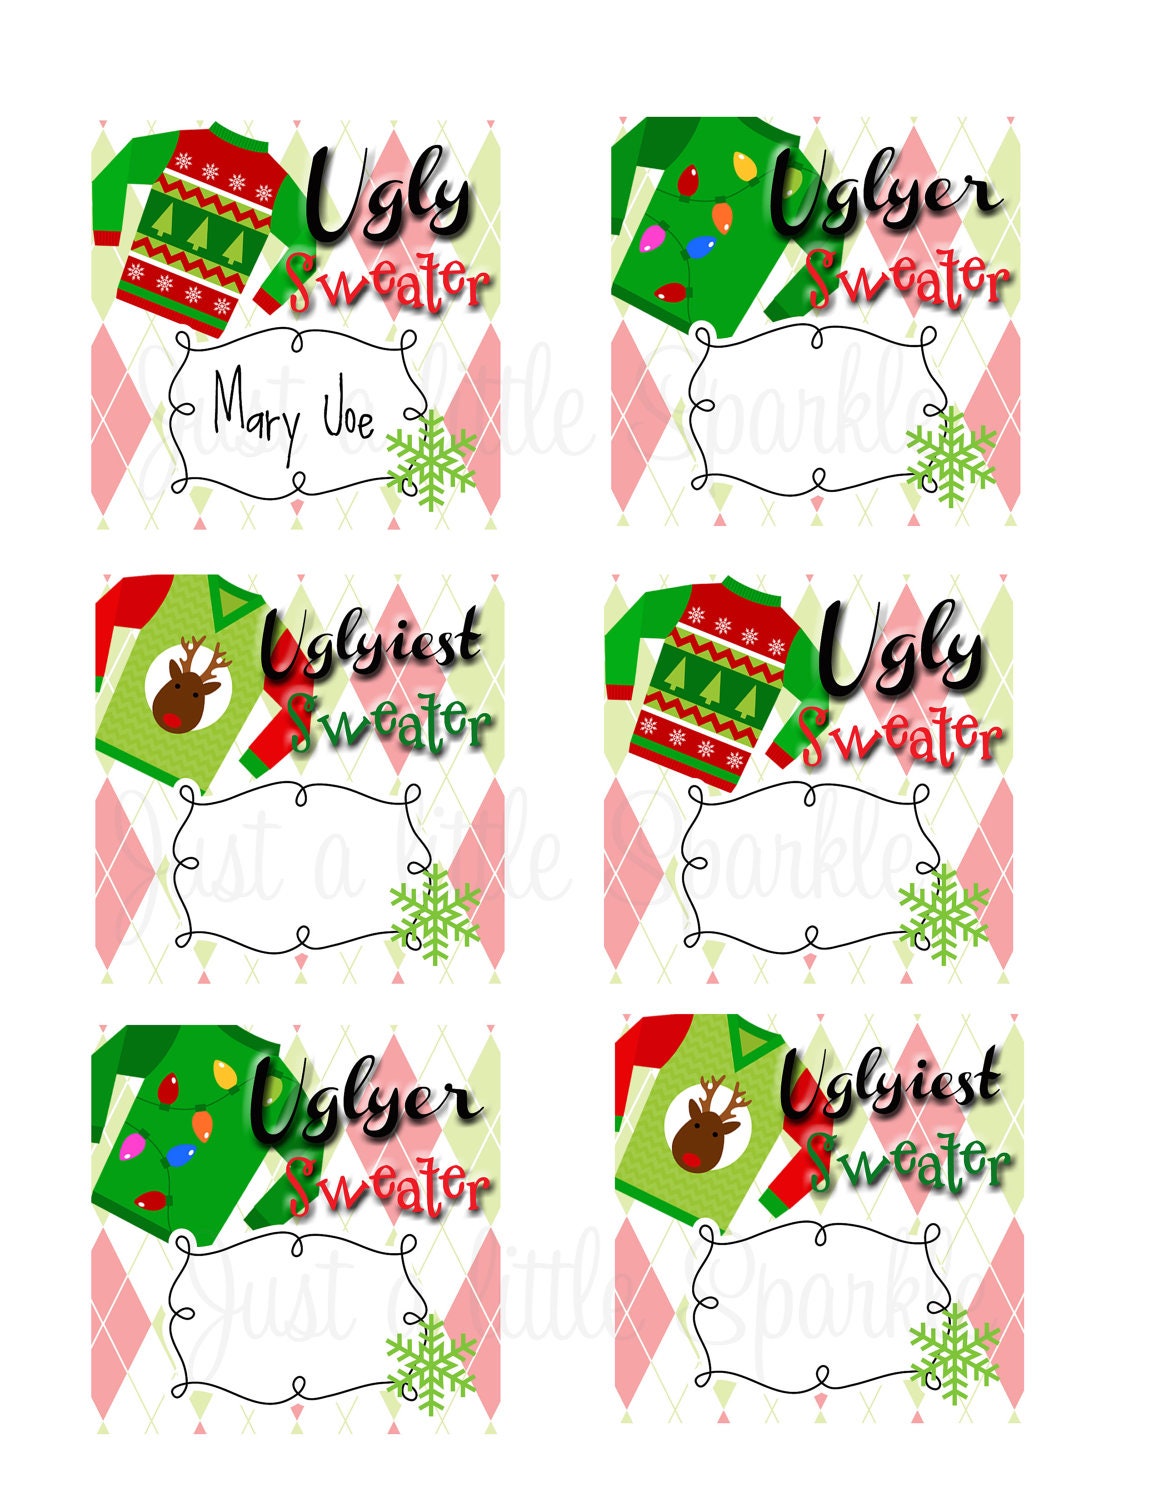 ugly-sweater-voting-ballots-diy-you-print-by-justalittlesparkle